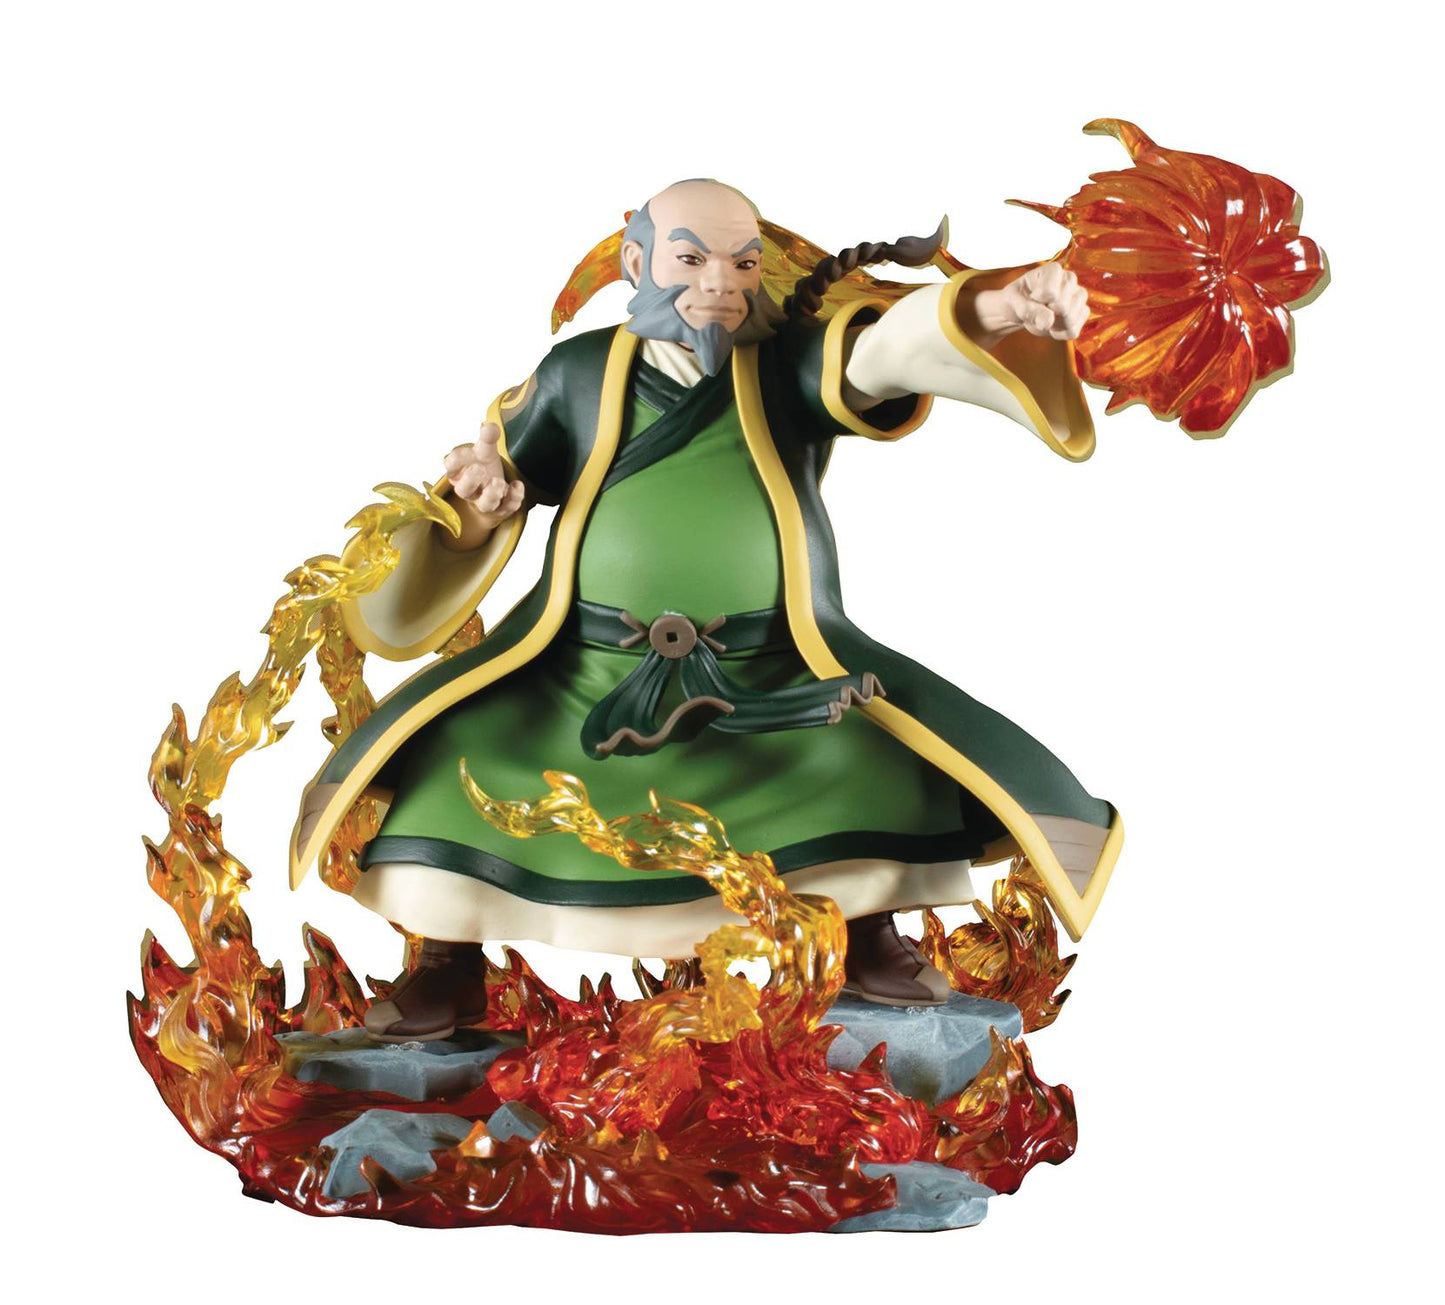 Avatar The Last Airbender Gallery Uncle Iroh Statue